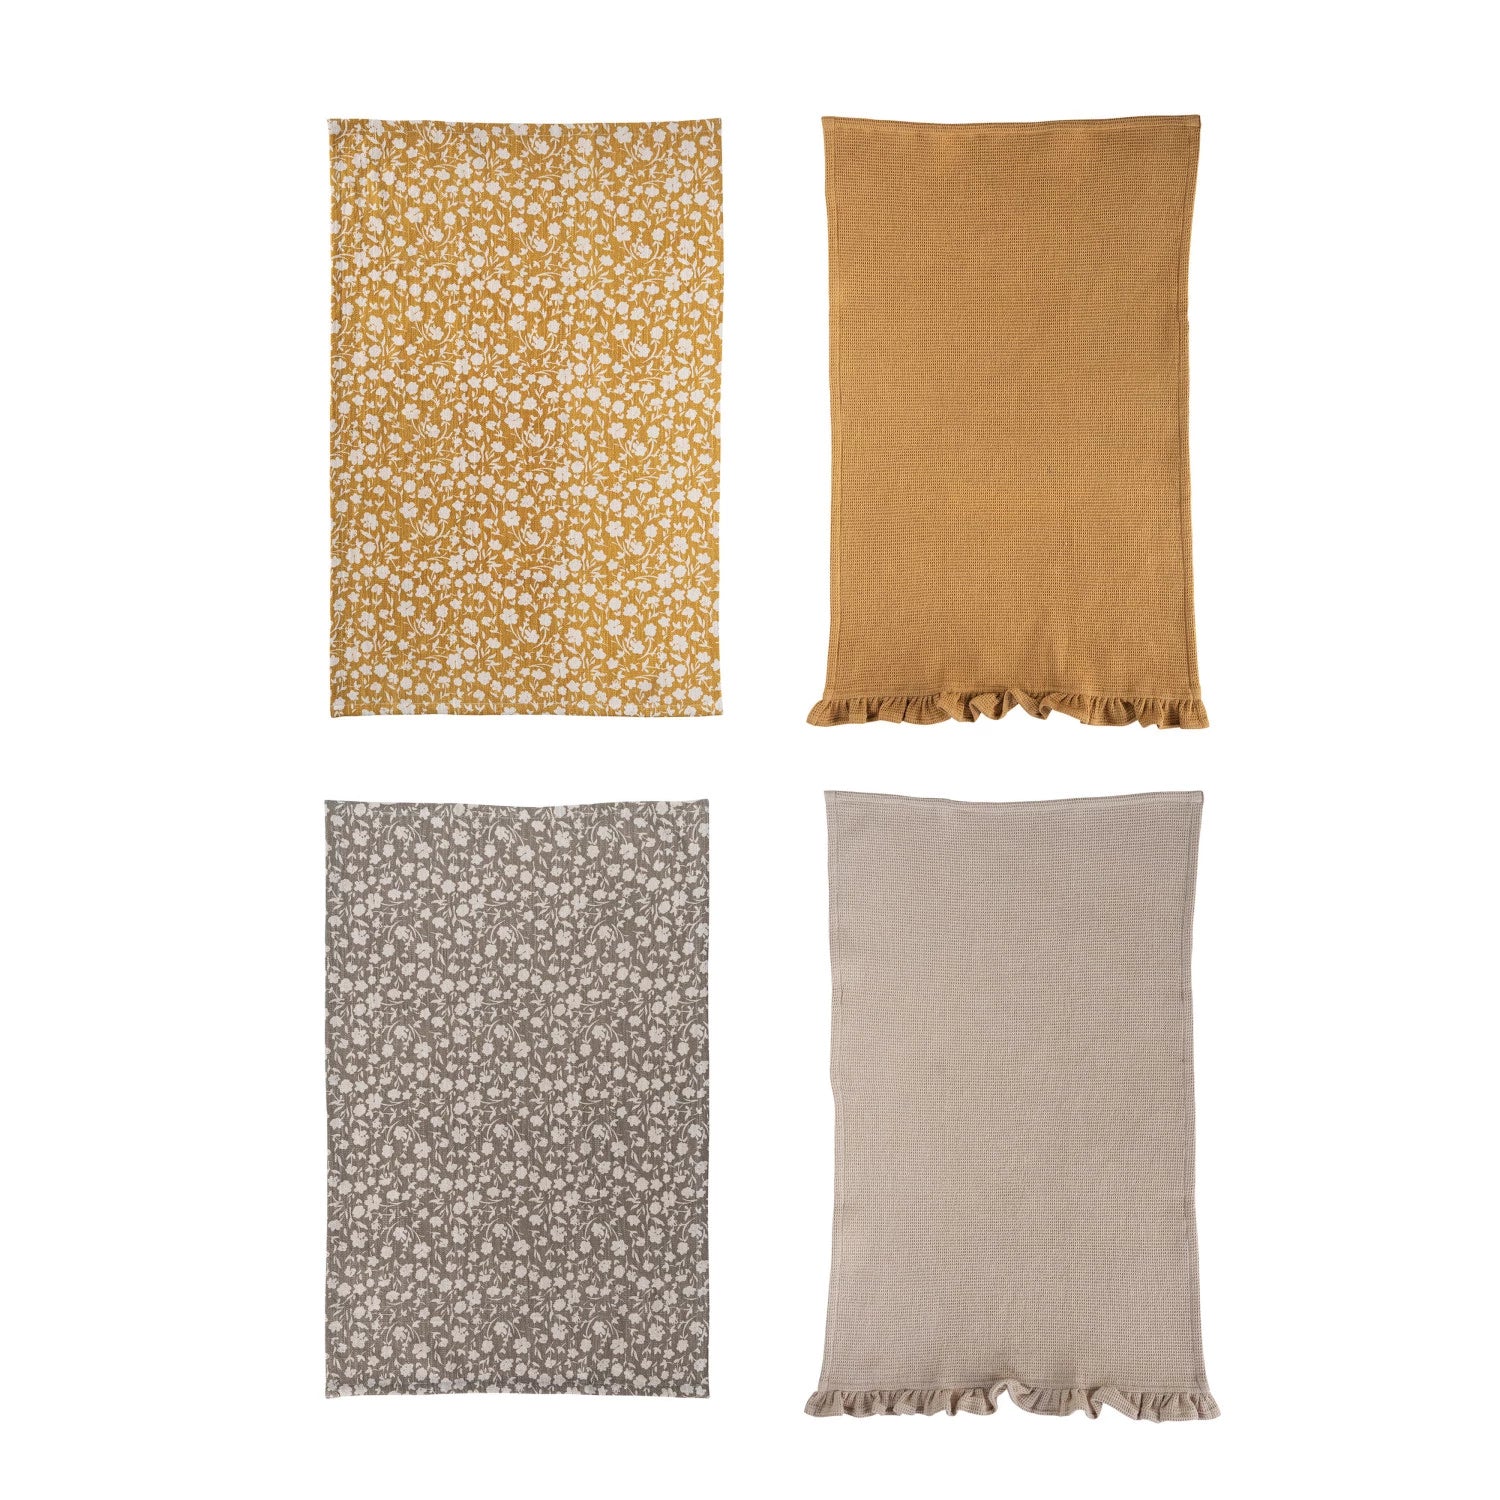 Set of two cotton slub printed and cotton waffle tea towels in the colors mustard and grey.